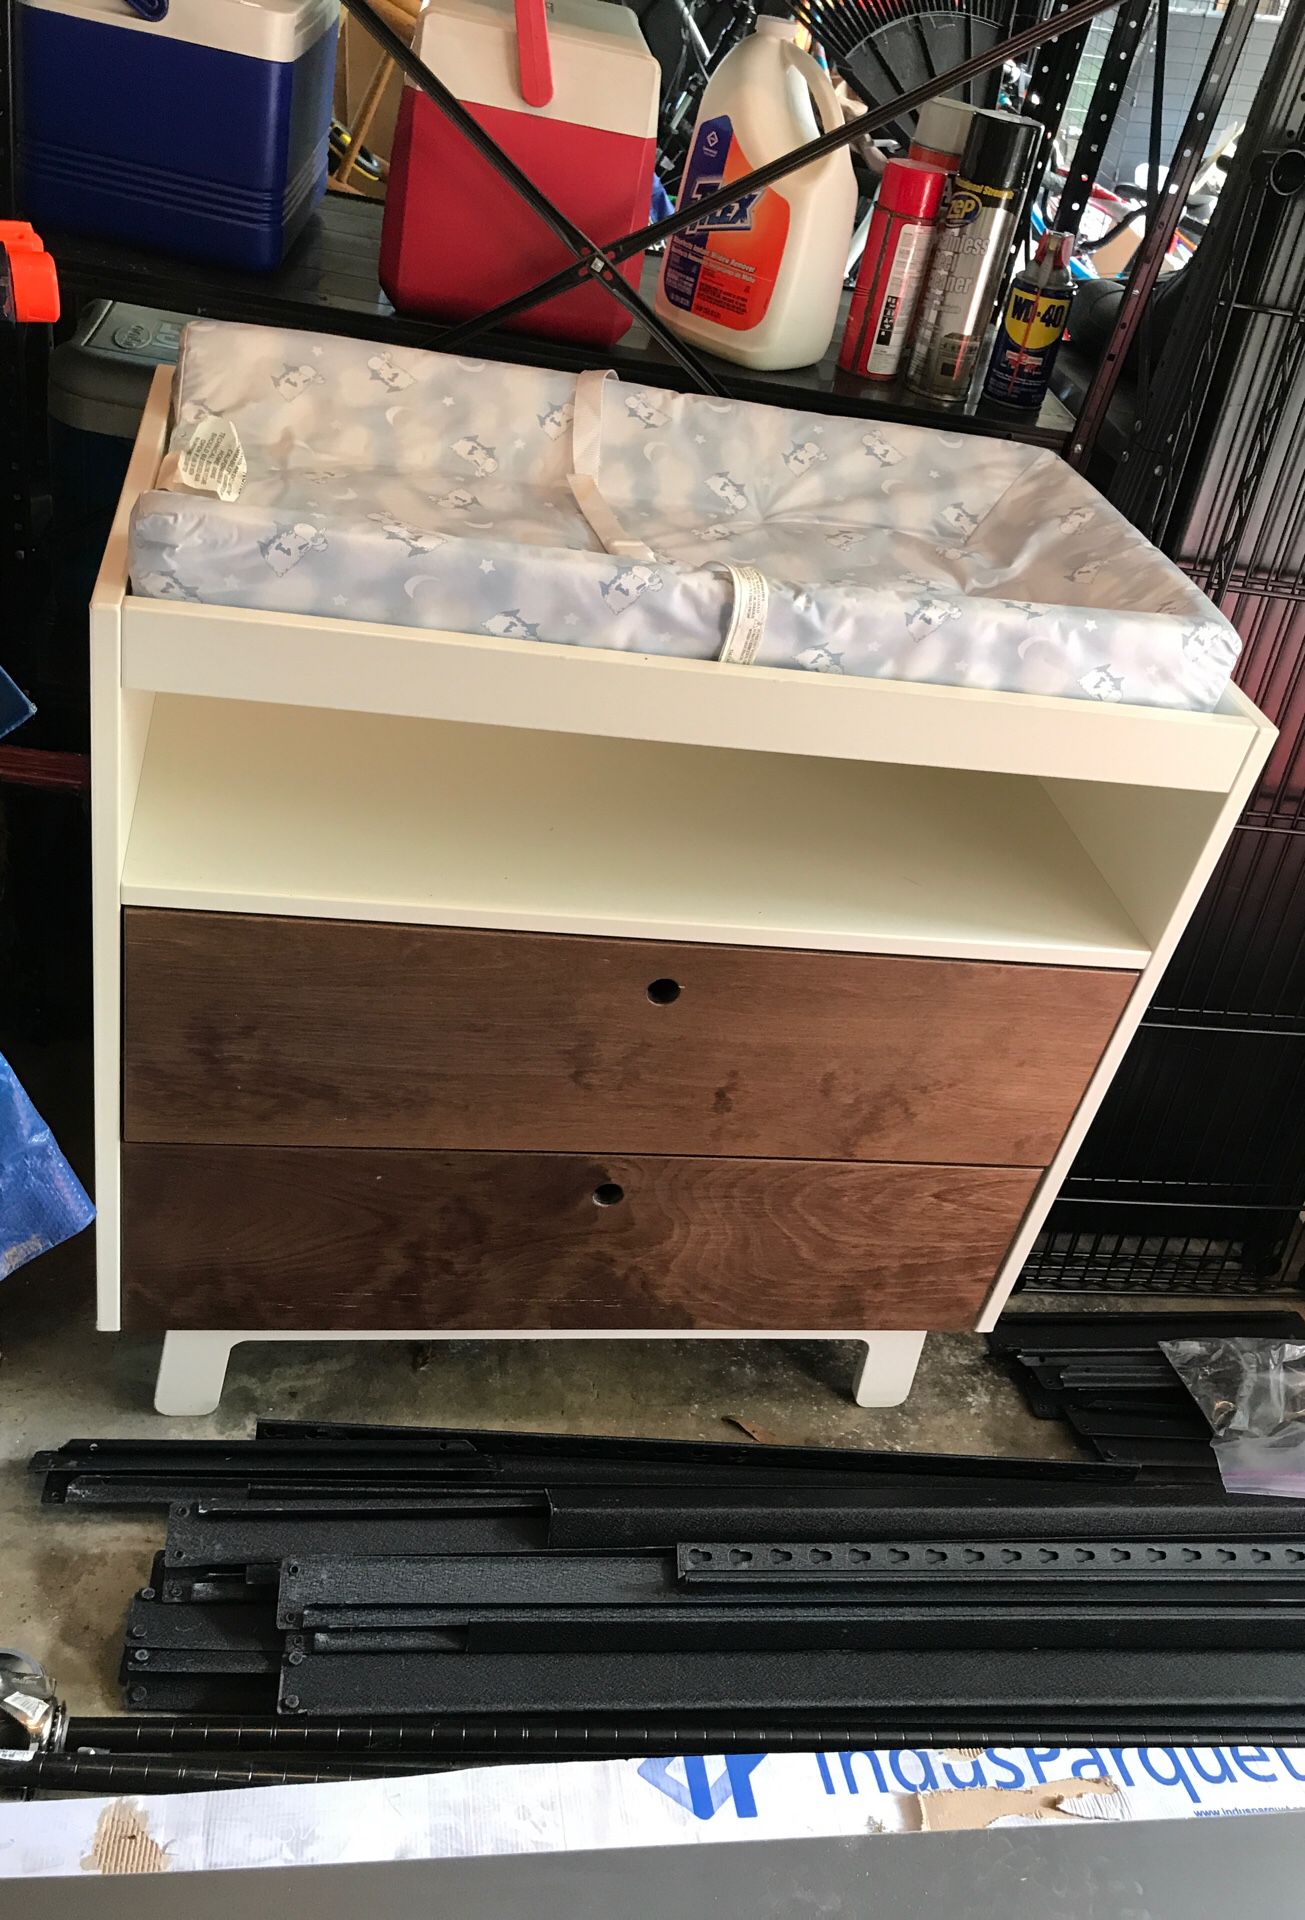 Changing table with storage